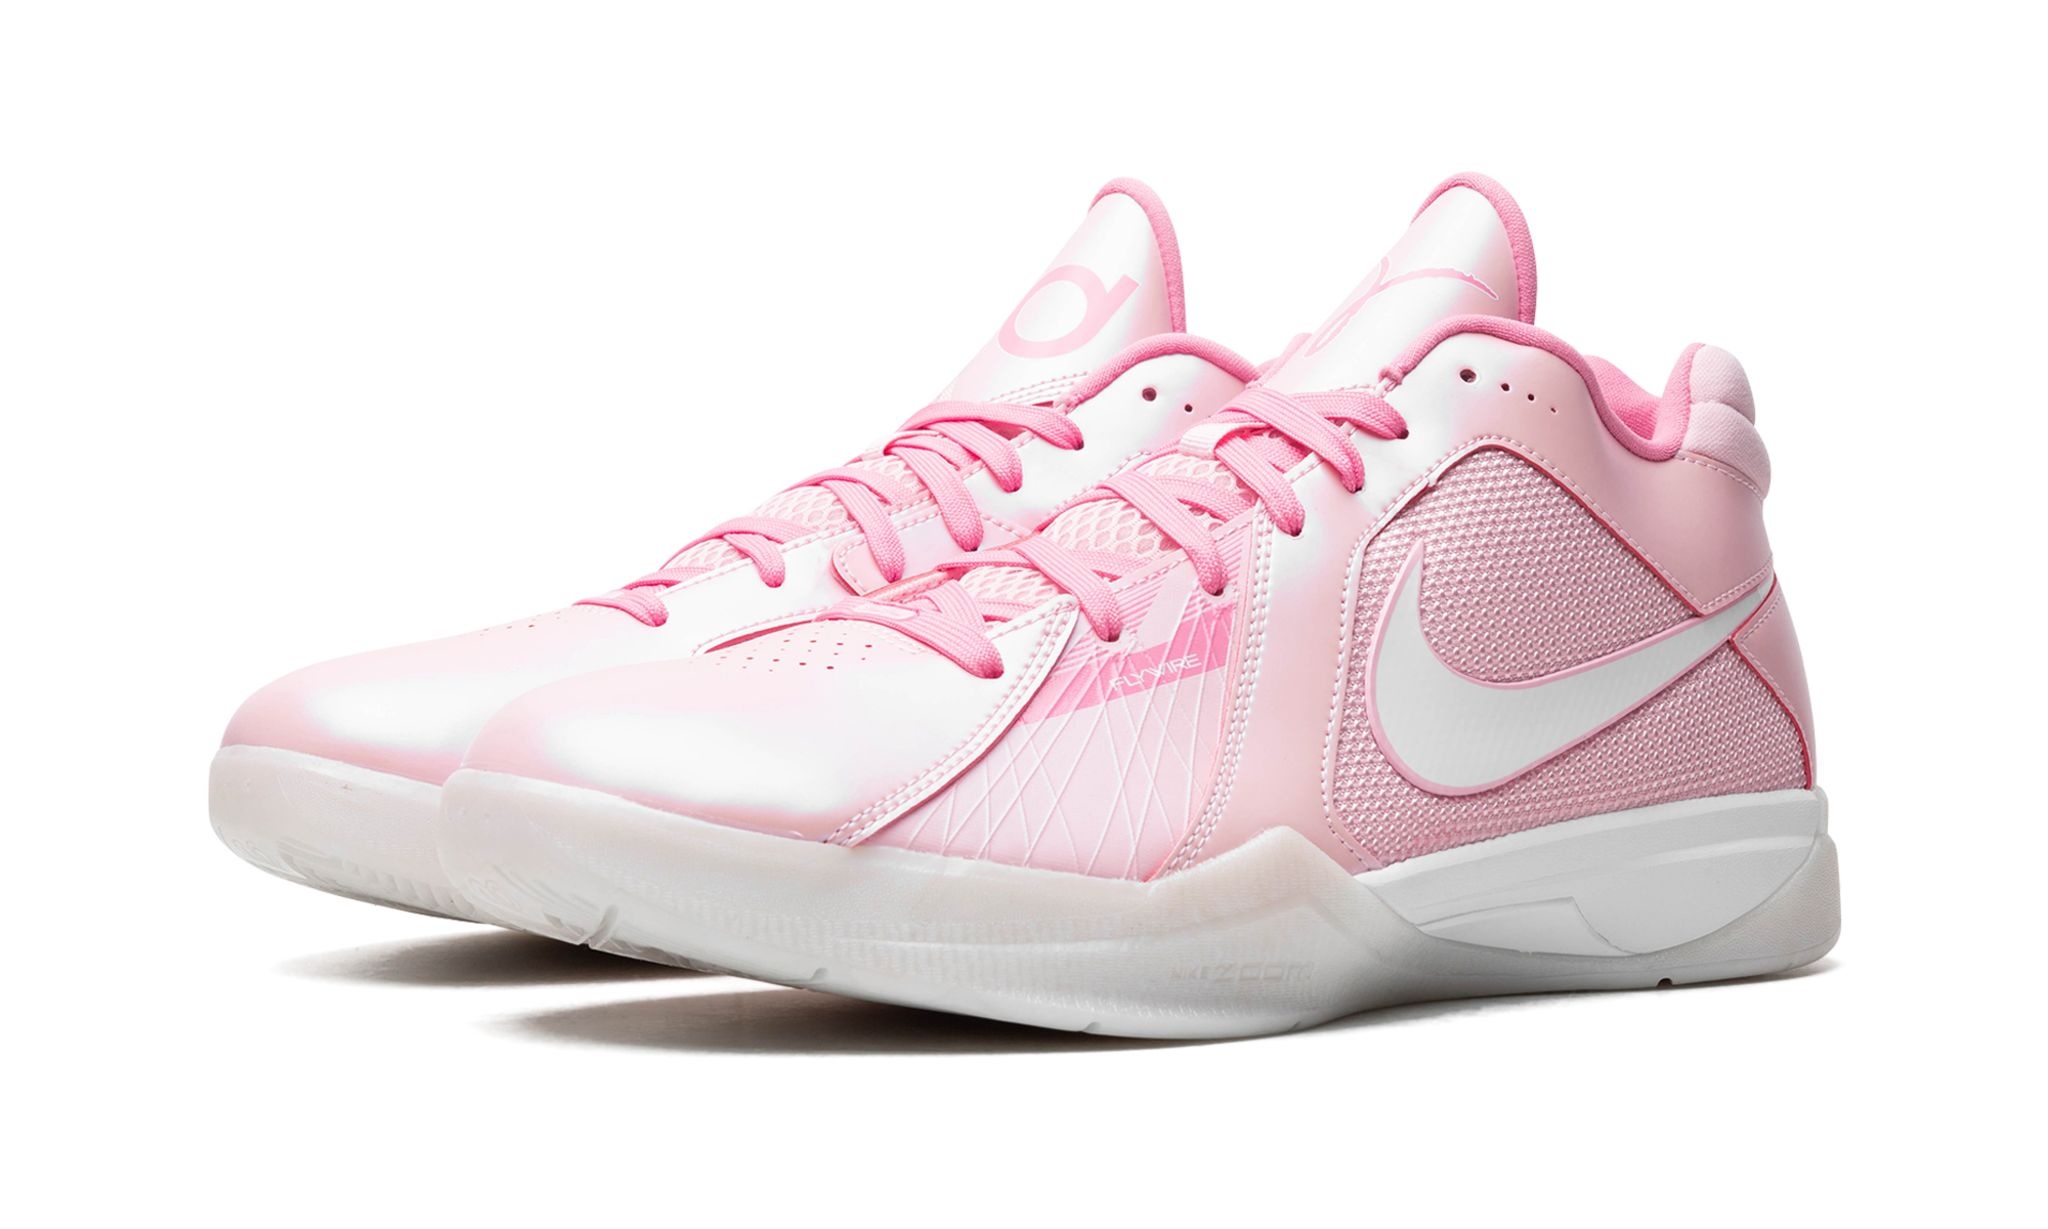 KD 3 "Aunt Pearl" - 2